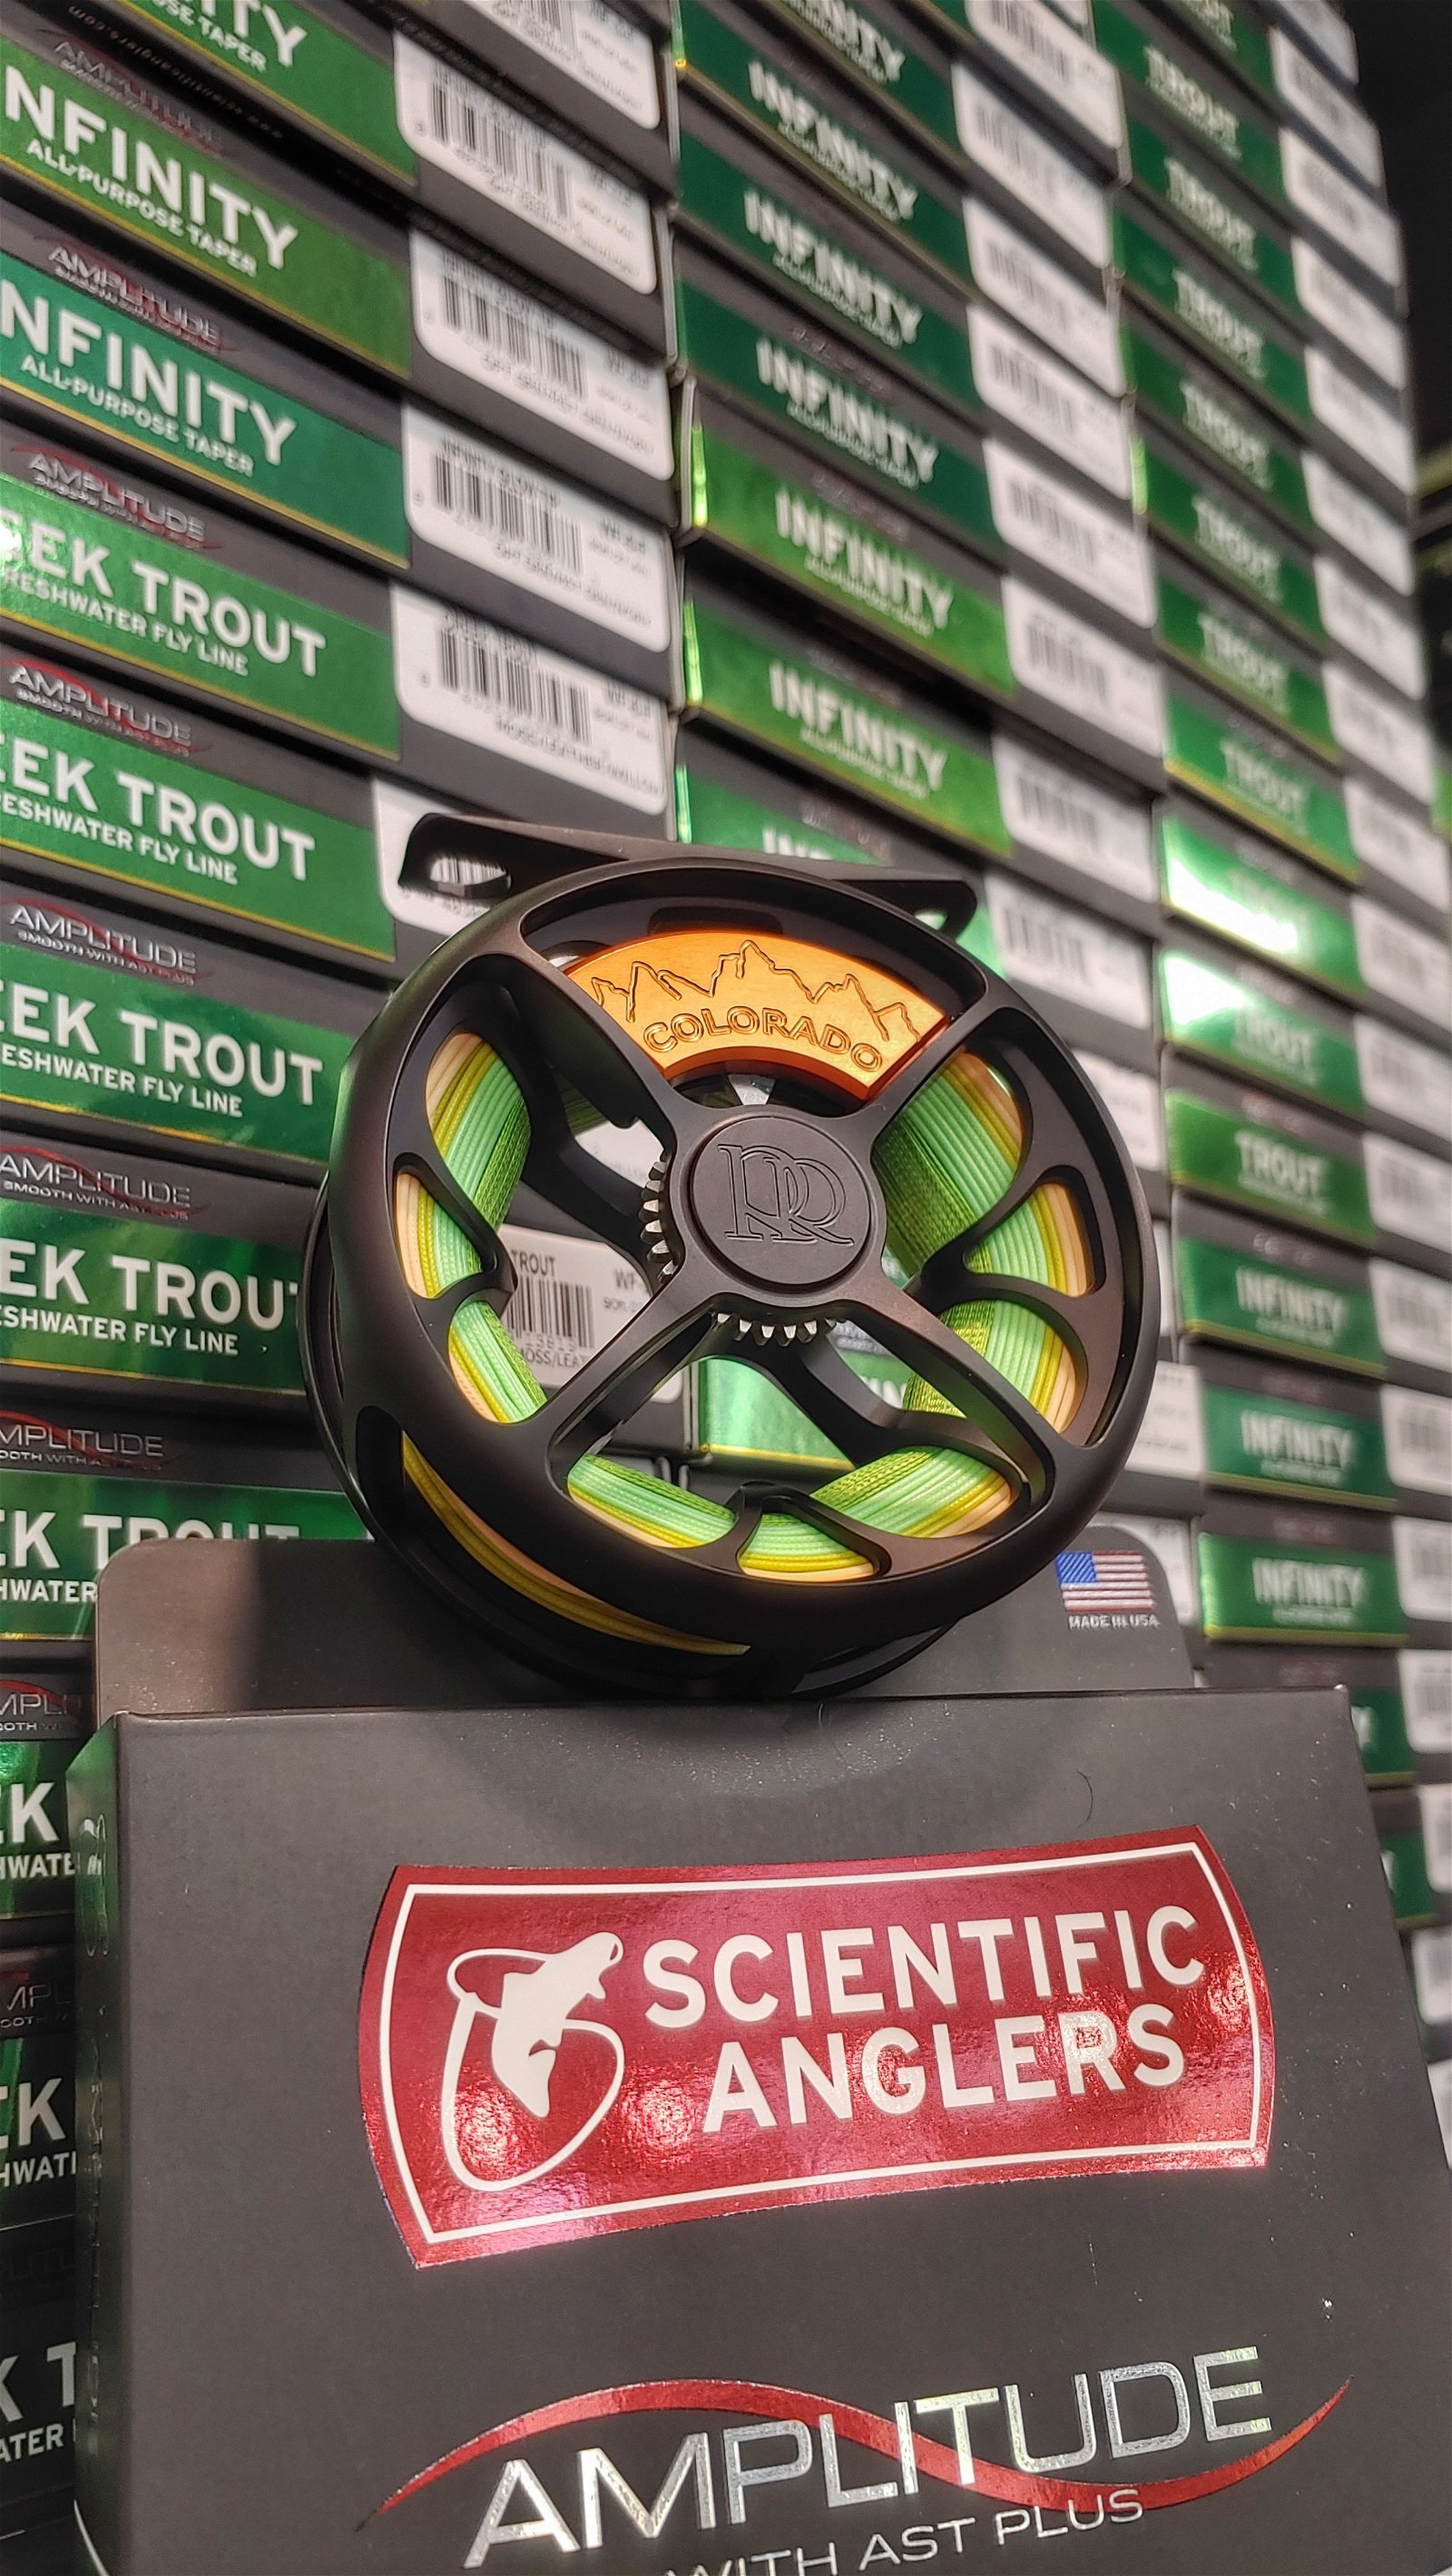 Lots of Scientific Anglers line sin stock!